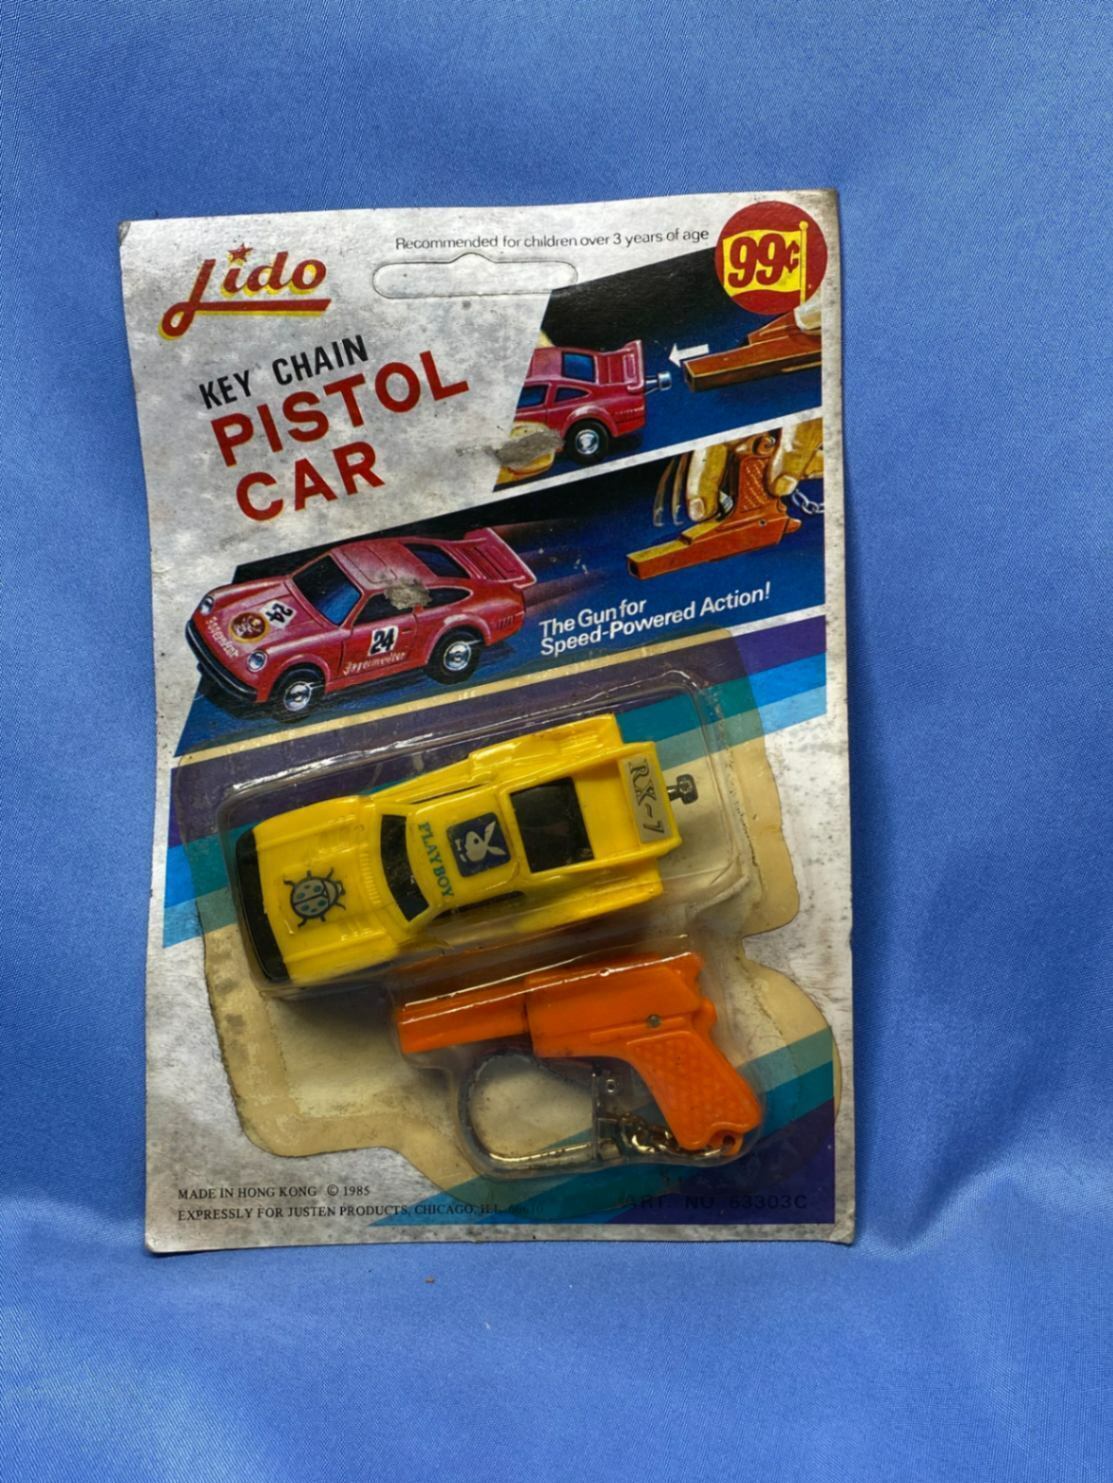 Lido Playboy Pistol Car Keychain For Speed Powered Action 1985 Justen Products